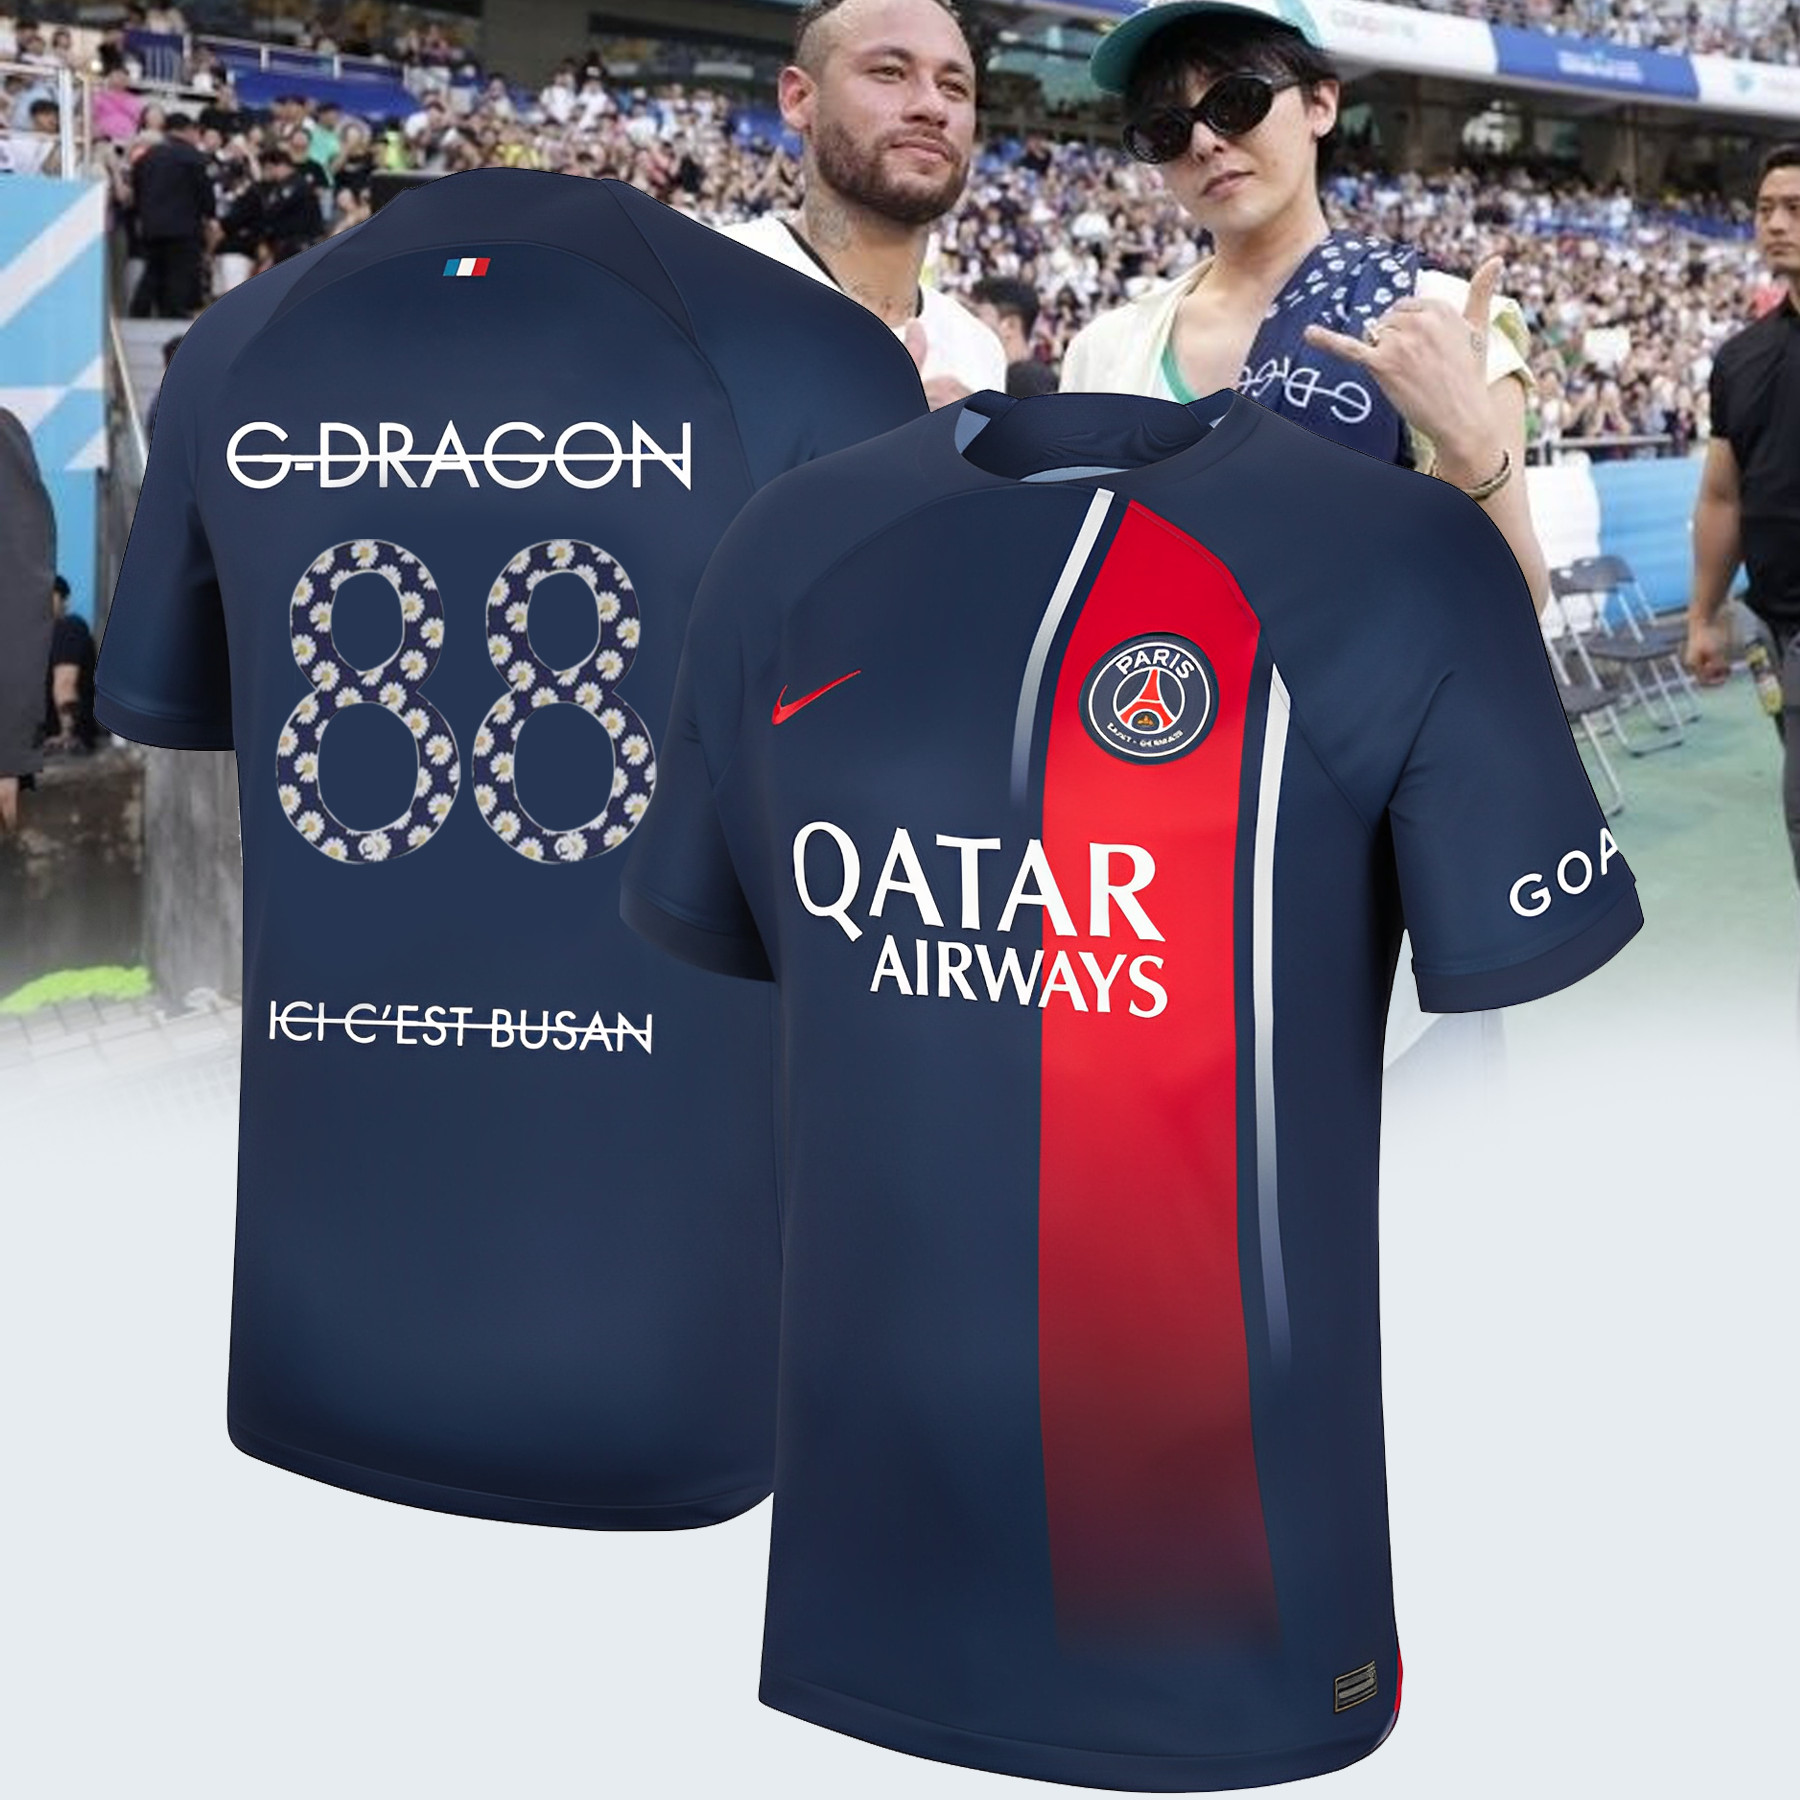 _GDRAGON produces uniforms in collaboration with PSG × PEACEMINUSONE